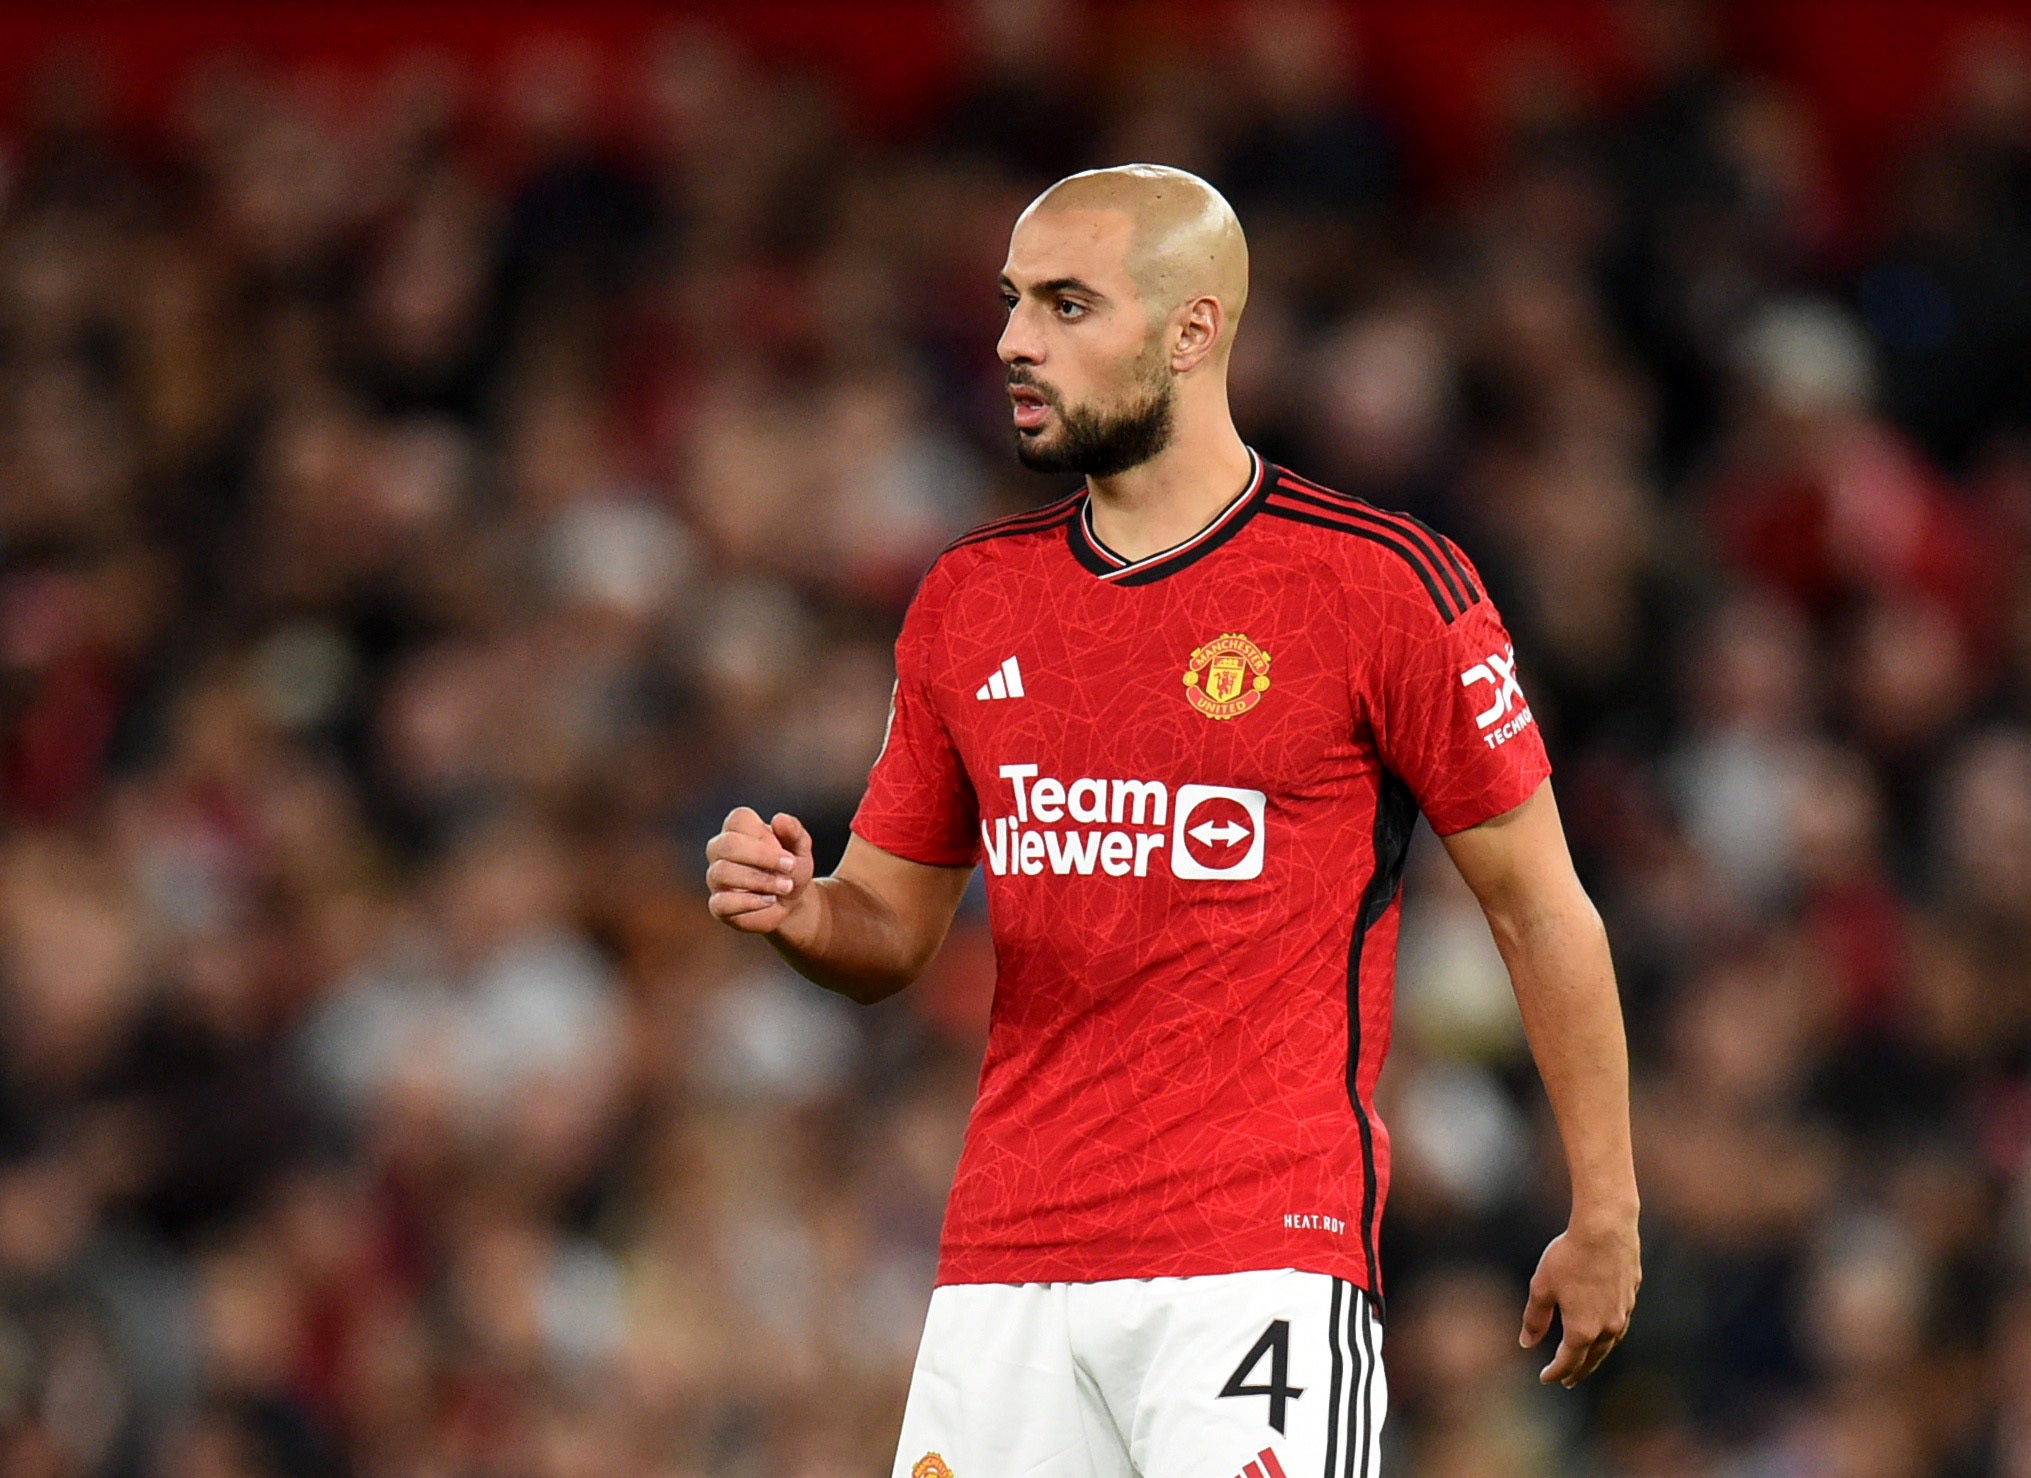  A bald Sofyan Amrabat is playing football for Manchester United, wearing a red jersey with a white collar and white shorts.